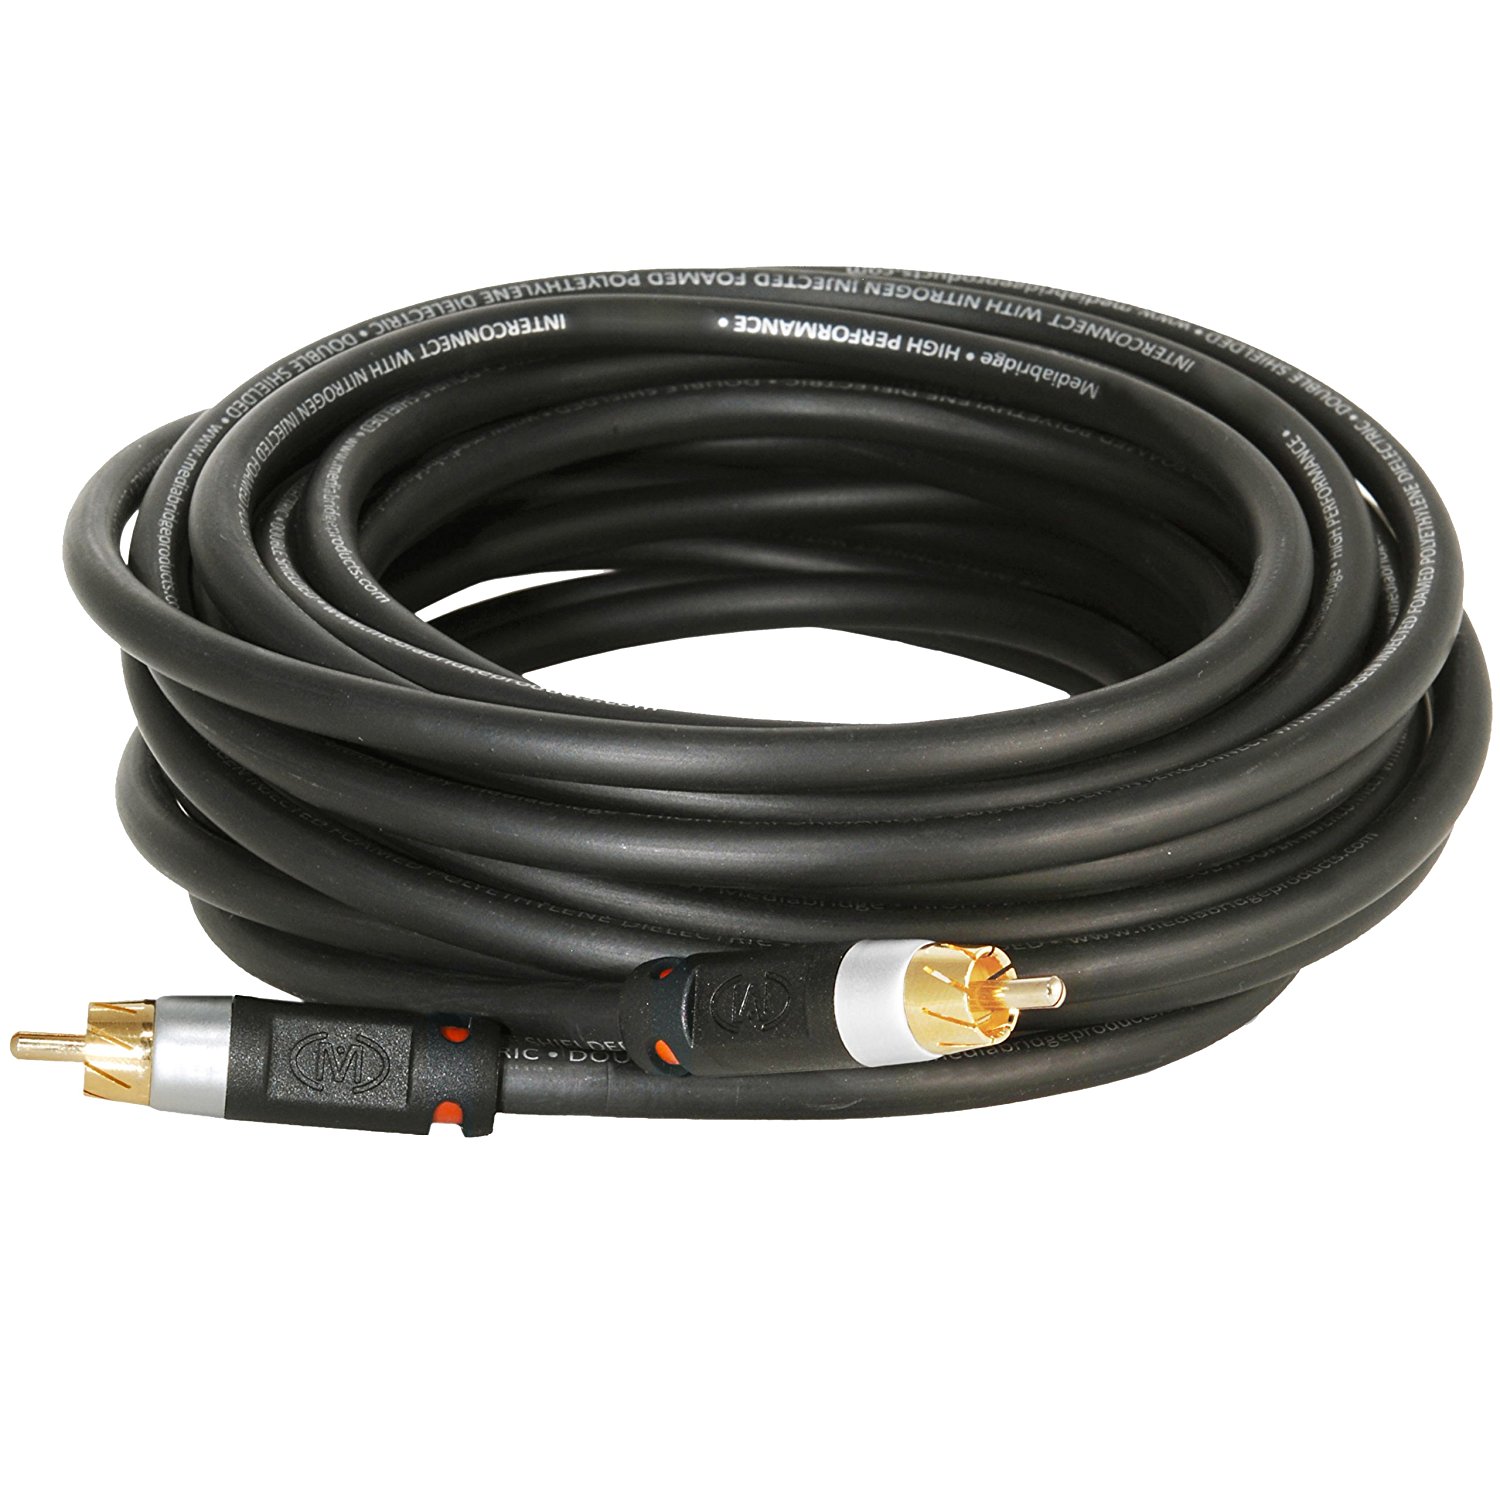 Mediabridge ULTRA Series Digital Audio Coaxial Cable (8 Feet) - Dual Shielded with RCA to RCA Gold-Plated Connectors - Black - (Part# CJ08-6BR-G2 ) - image 4 of 4